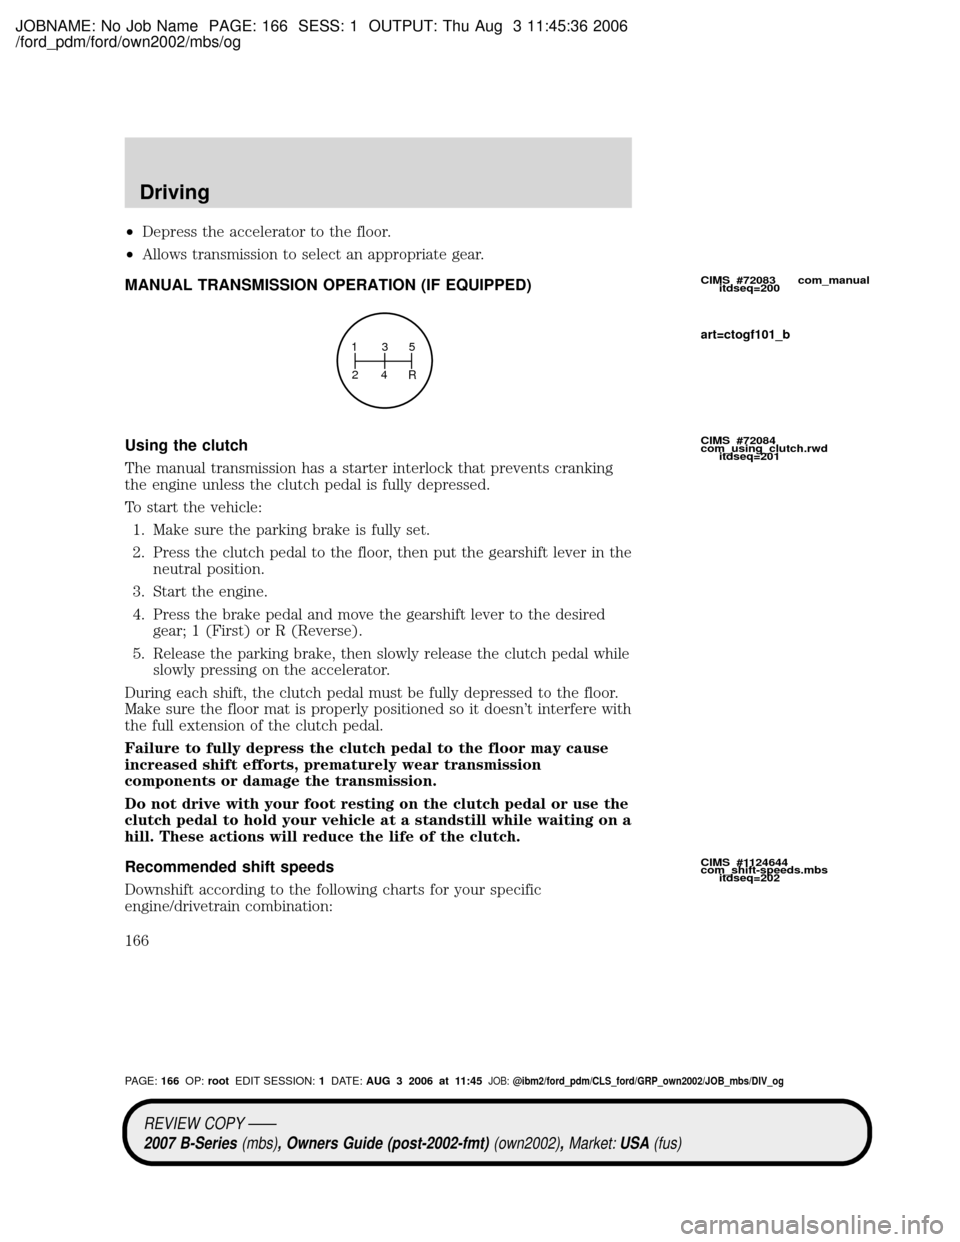 MAZDA MODEL B2300 TRUCK 2007  Owners Manual (in English) JOBNAME: No Job Name PAGE: 166 SESS: 1 OUTPUT: Thu Aug 3 11:45:36 2006
/ford_pdm/ford/own2002/mbs/og
²Depress the accelerator to the floor.
²Allows transmission to select an appropriate gear.
MANUAL